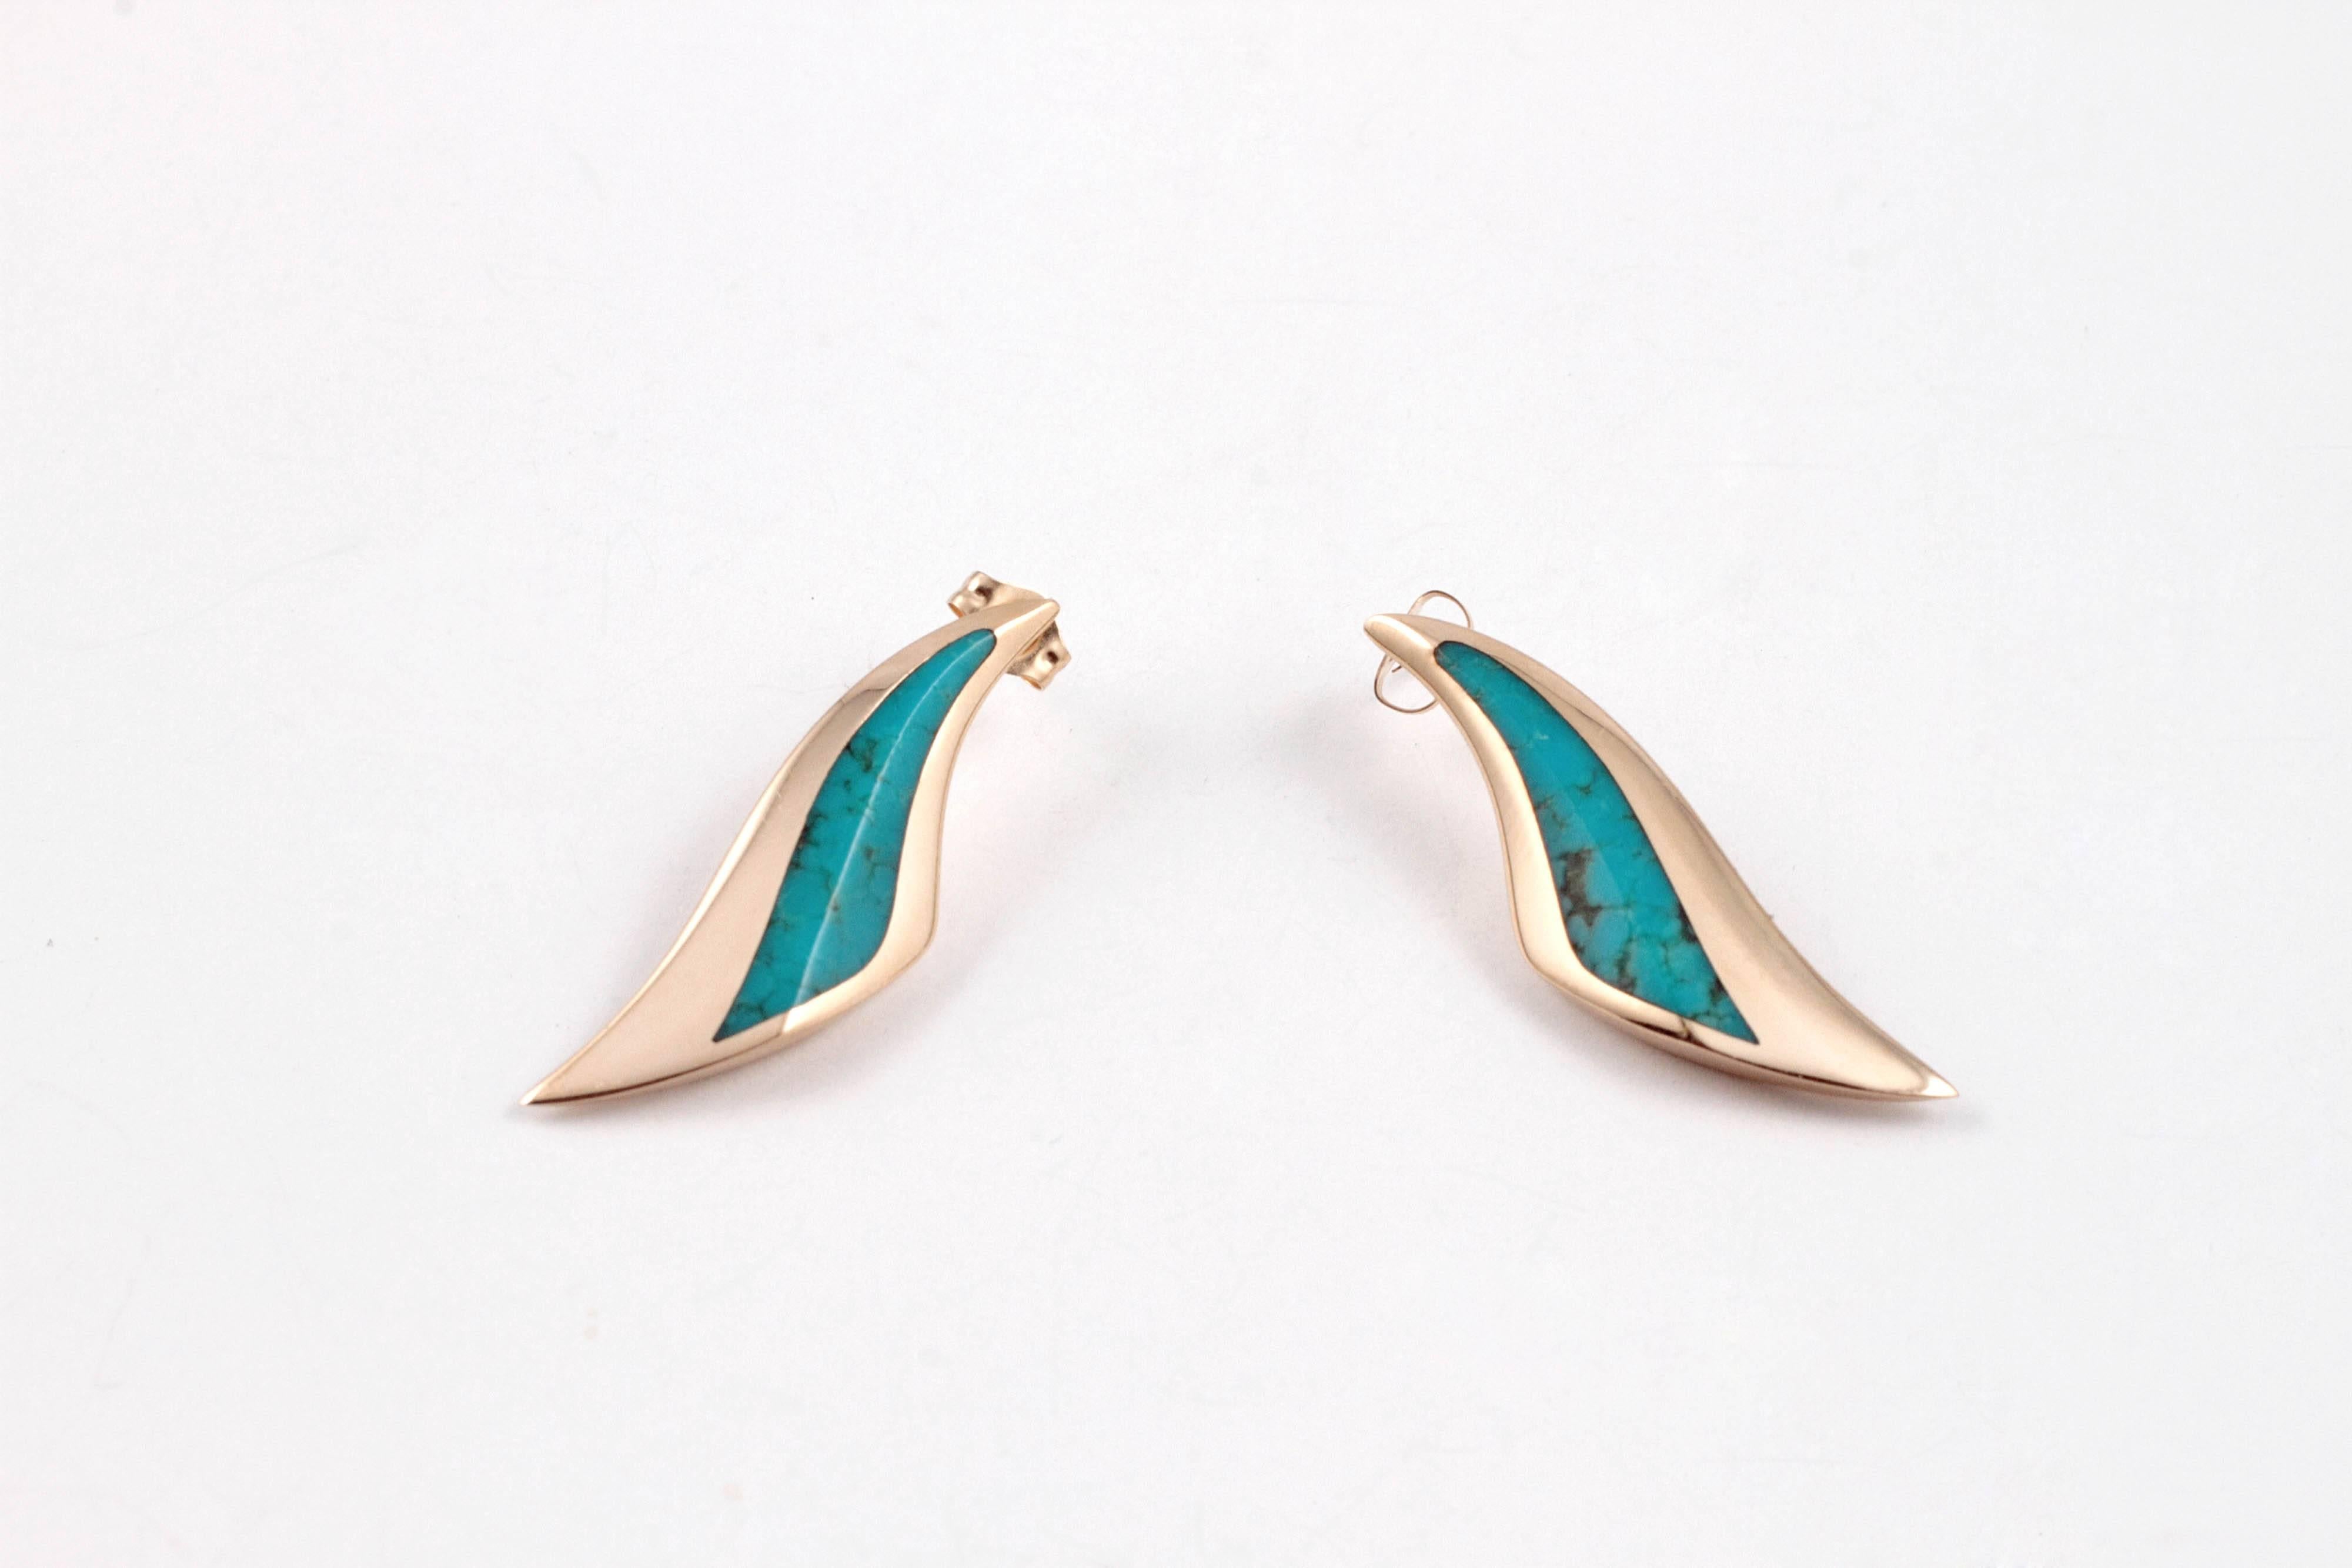 For the turquoise lover, Kabana is tops!  These stunning earrings measure 1 1/4 inches in length, are secured with a standard friction back and are long and lovely!  